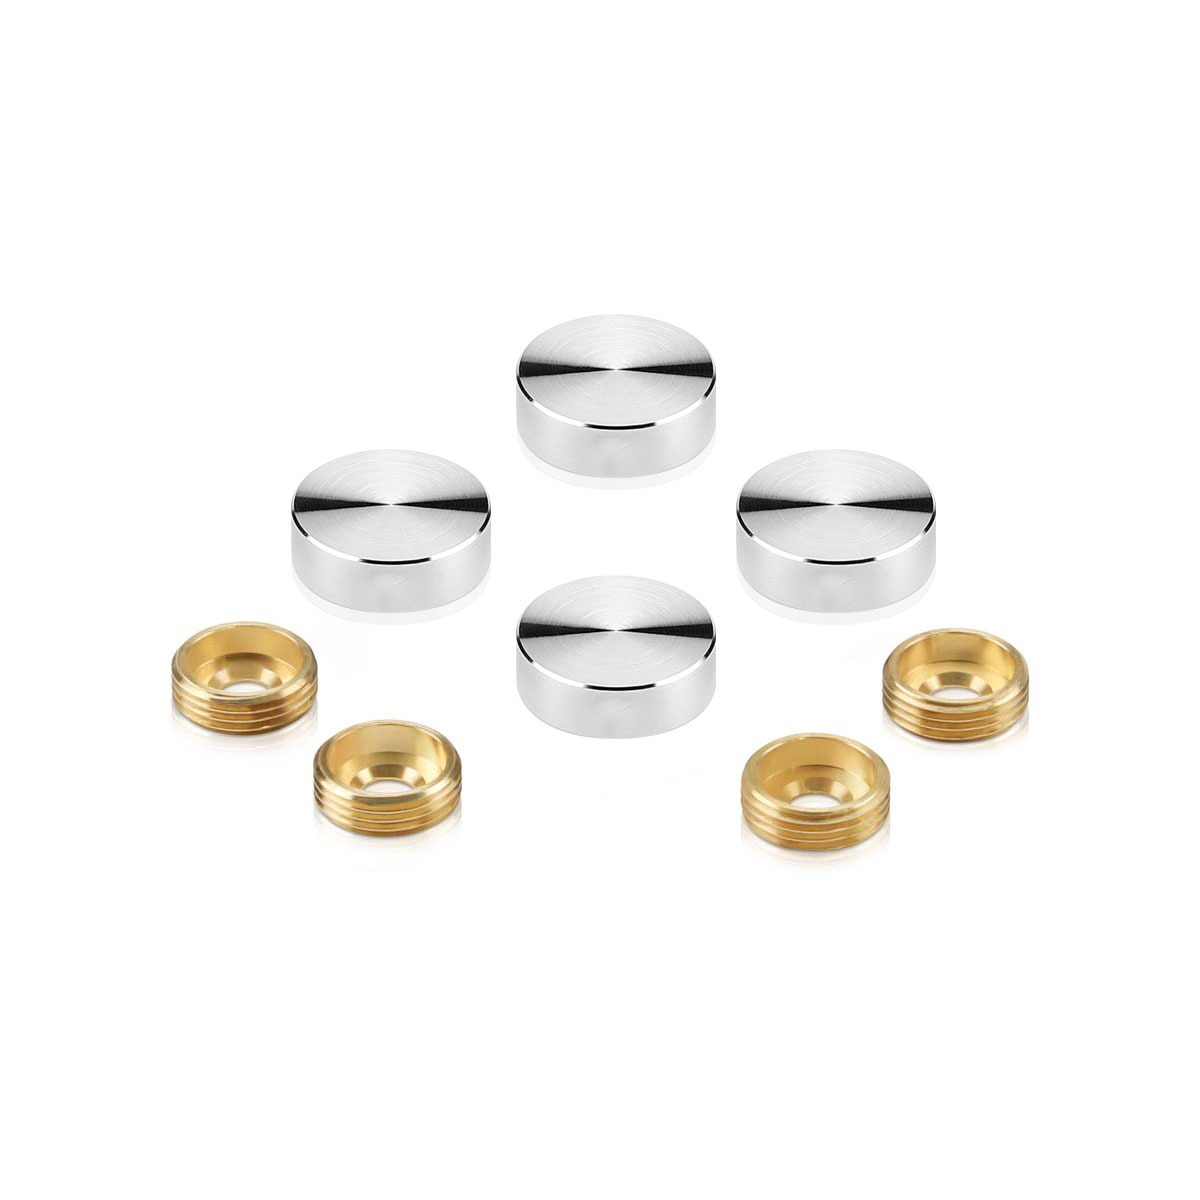 Set of 4 Screw Cover, Diameter: 3/4'', Satin Brushed Stainless Steel Finish (Indoor Use), Special for 3/16'' Diameter TAPCON Screw Slotted Hex (TAPCON Screw Sold Separately)